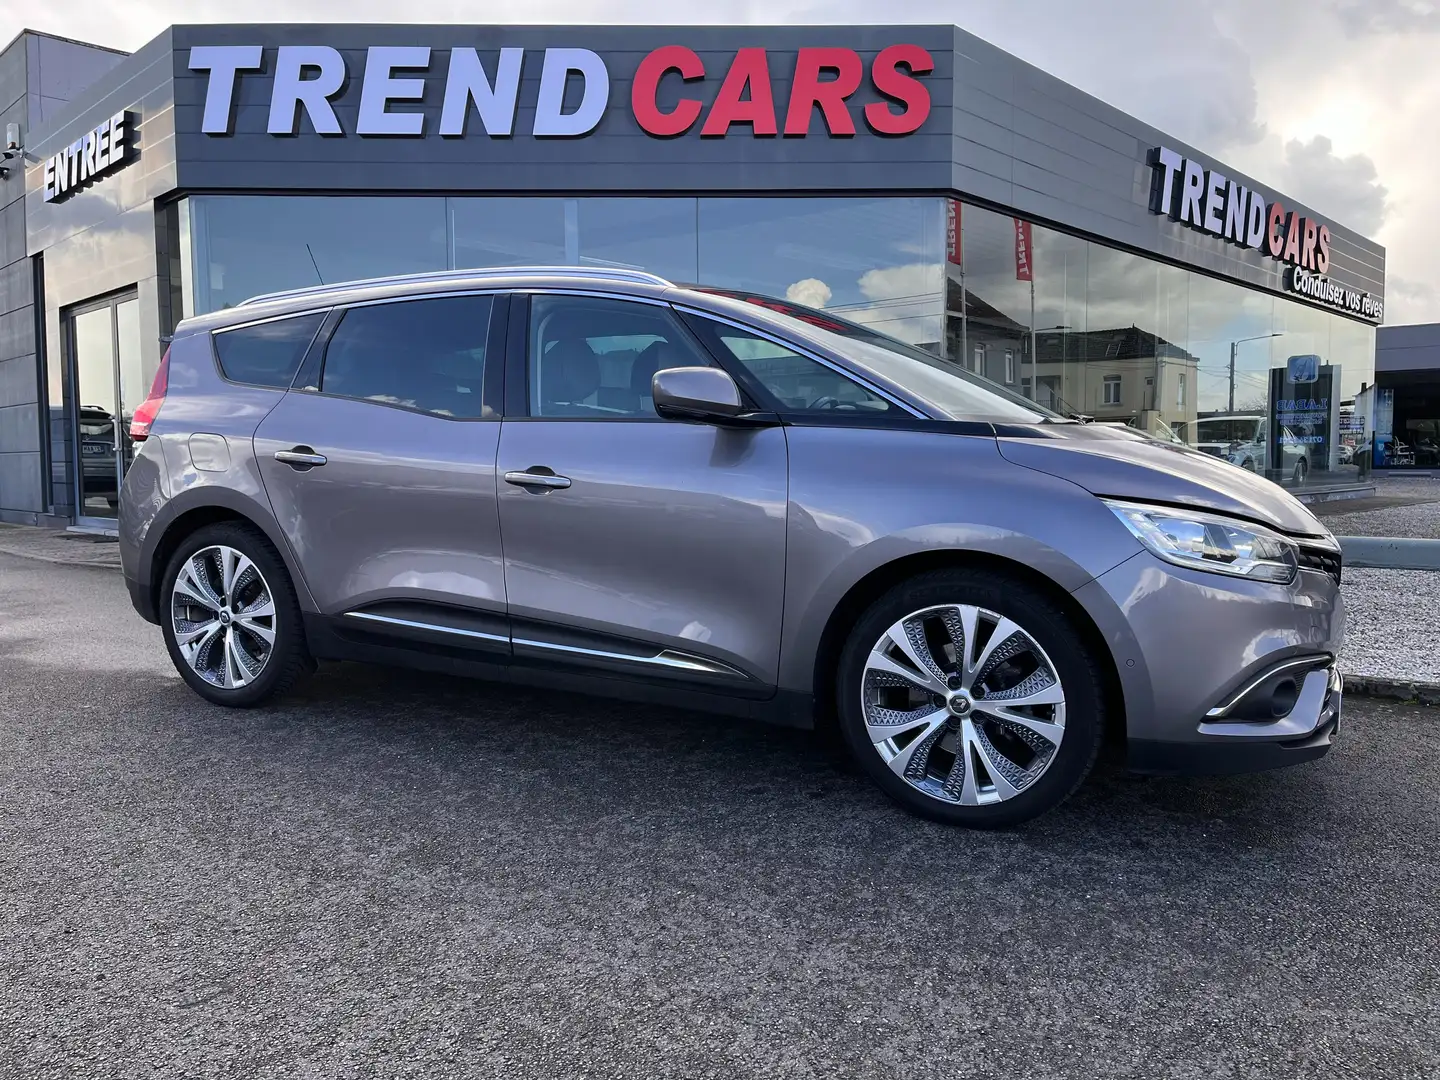 Renault Grand Scenic 1.5 dCi Intens AUTO. 7 PLACES CAME CARPLAY LED GA. siva - 2